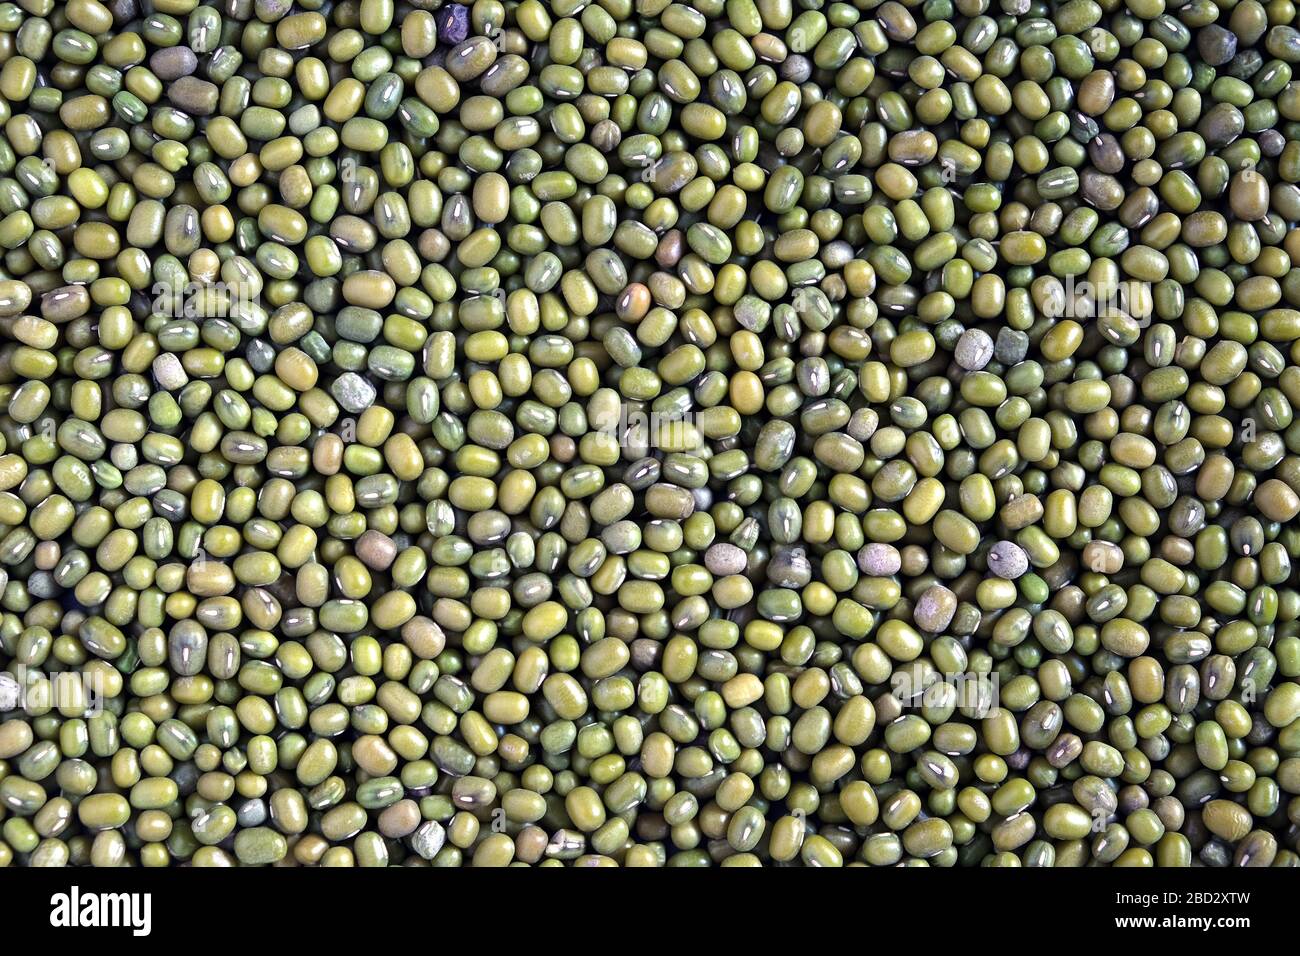 Food supplies. Crop of many dry green lentil grains on flat surface as background top view close up Stock Photo